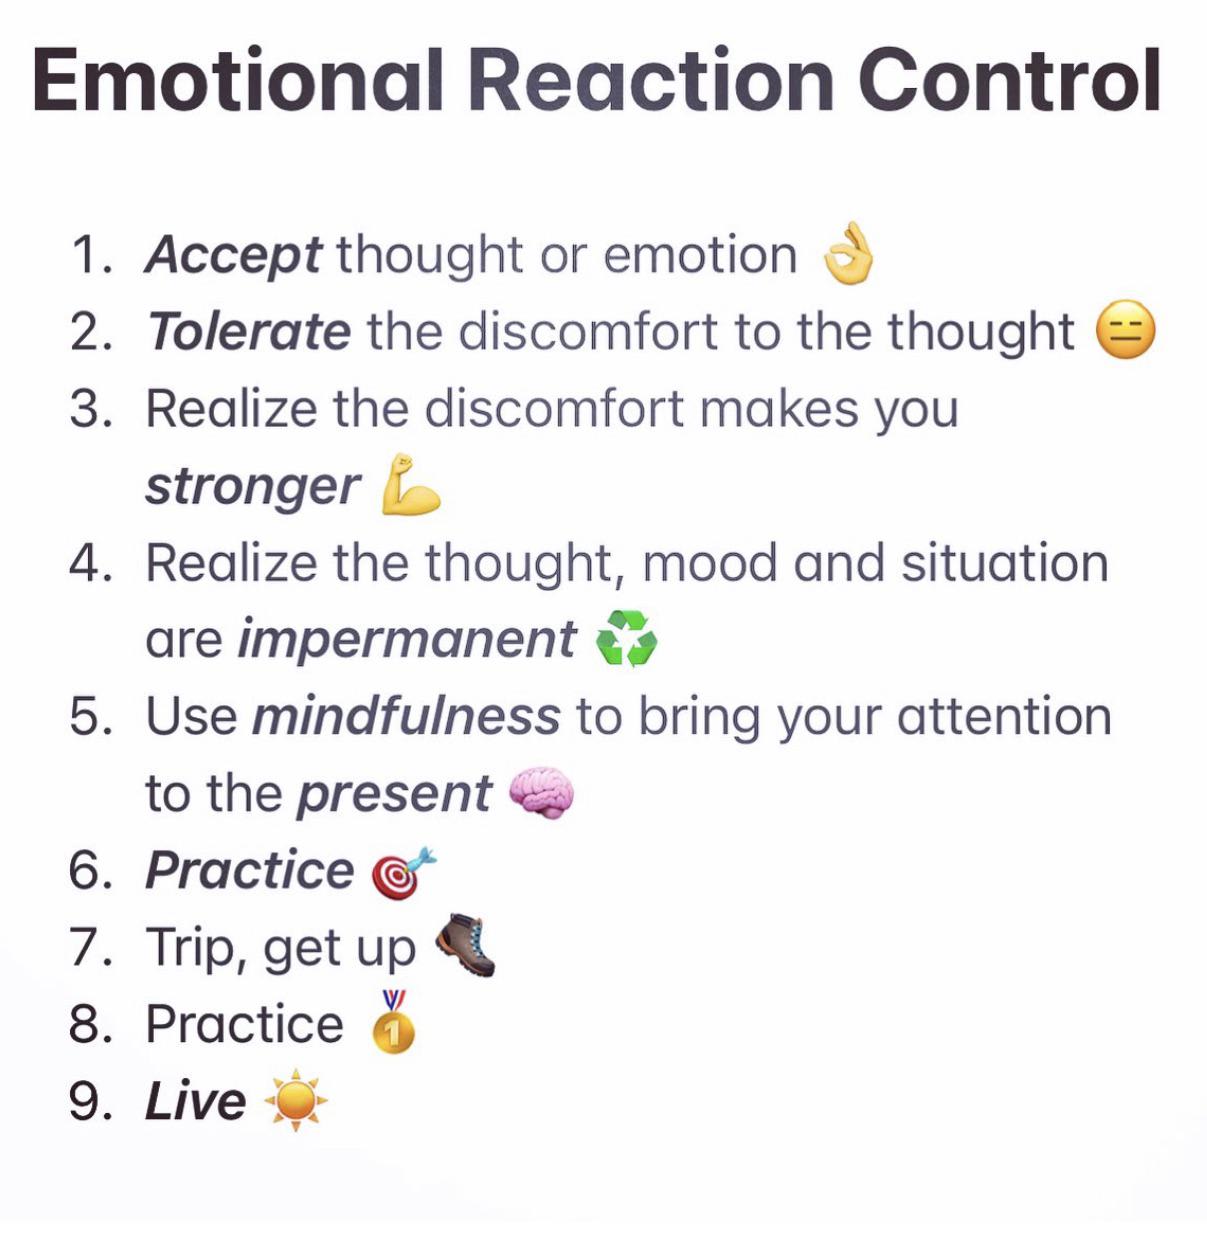 Want to make mindfulness easier? Learn Emotional Reaction Control. Focus and clarity are amazing assets to help us live mindfully. You can change how you react to emotions so they don’t fog your concentration. Monk attitude in a practical way.